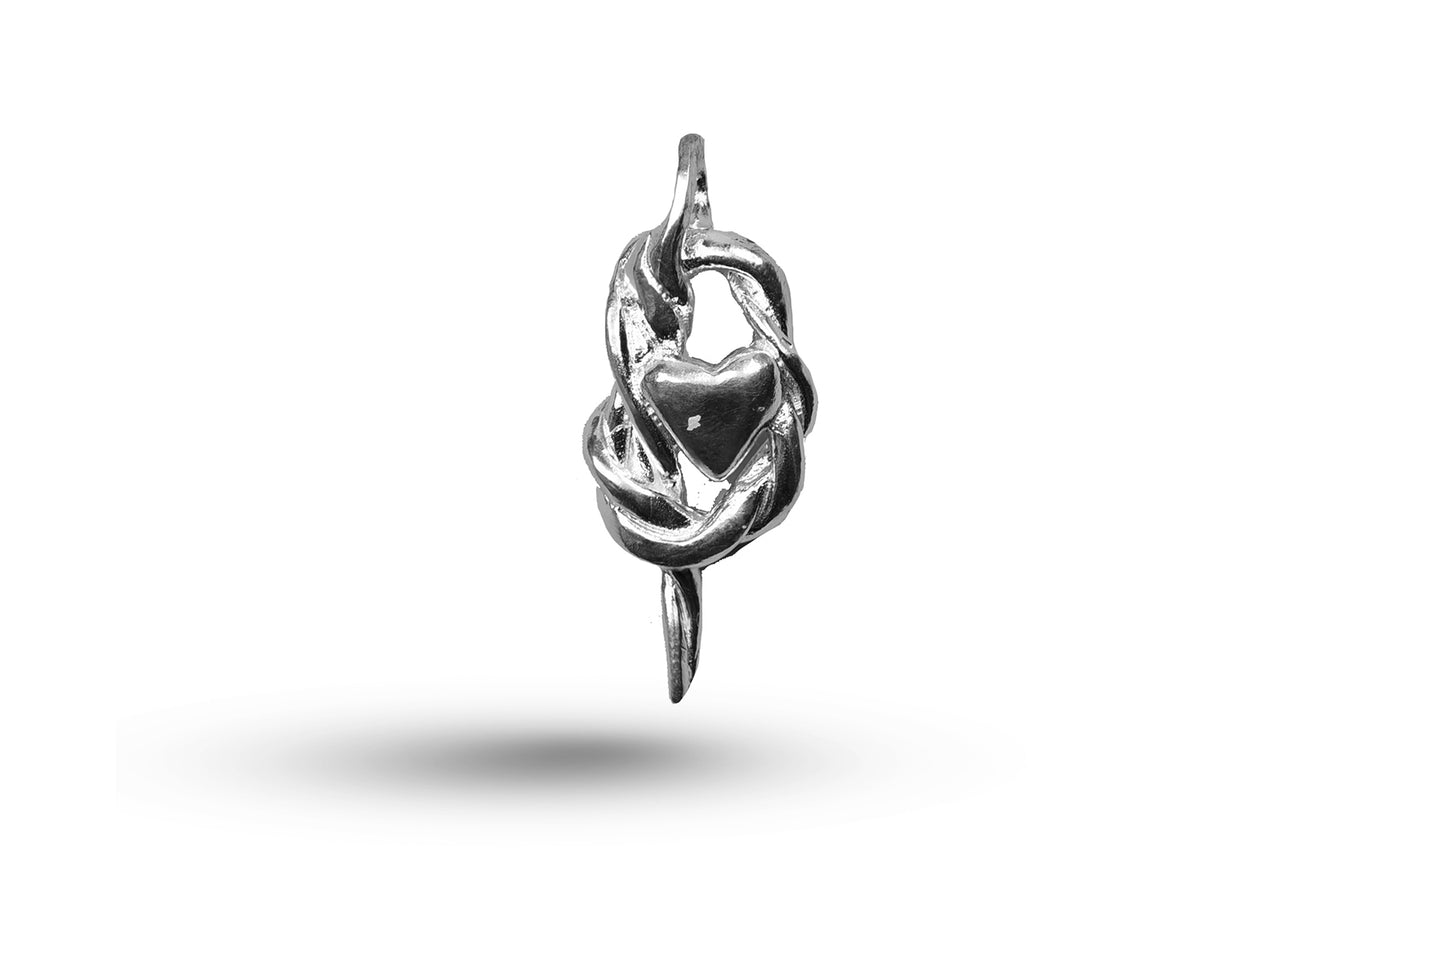 White gold Lovers Knot charm.